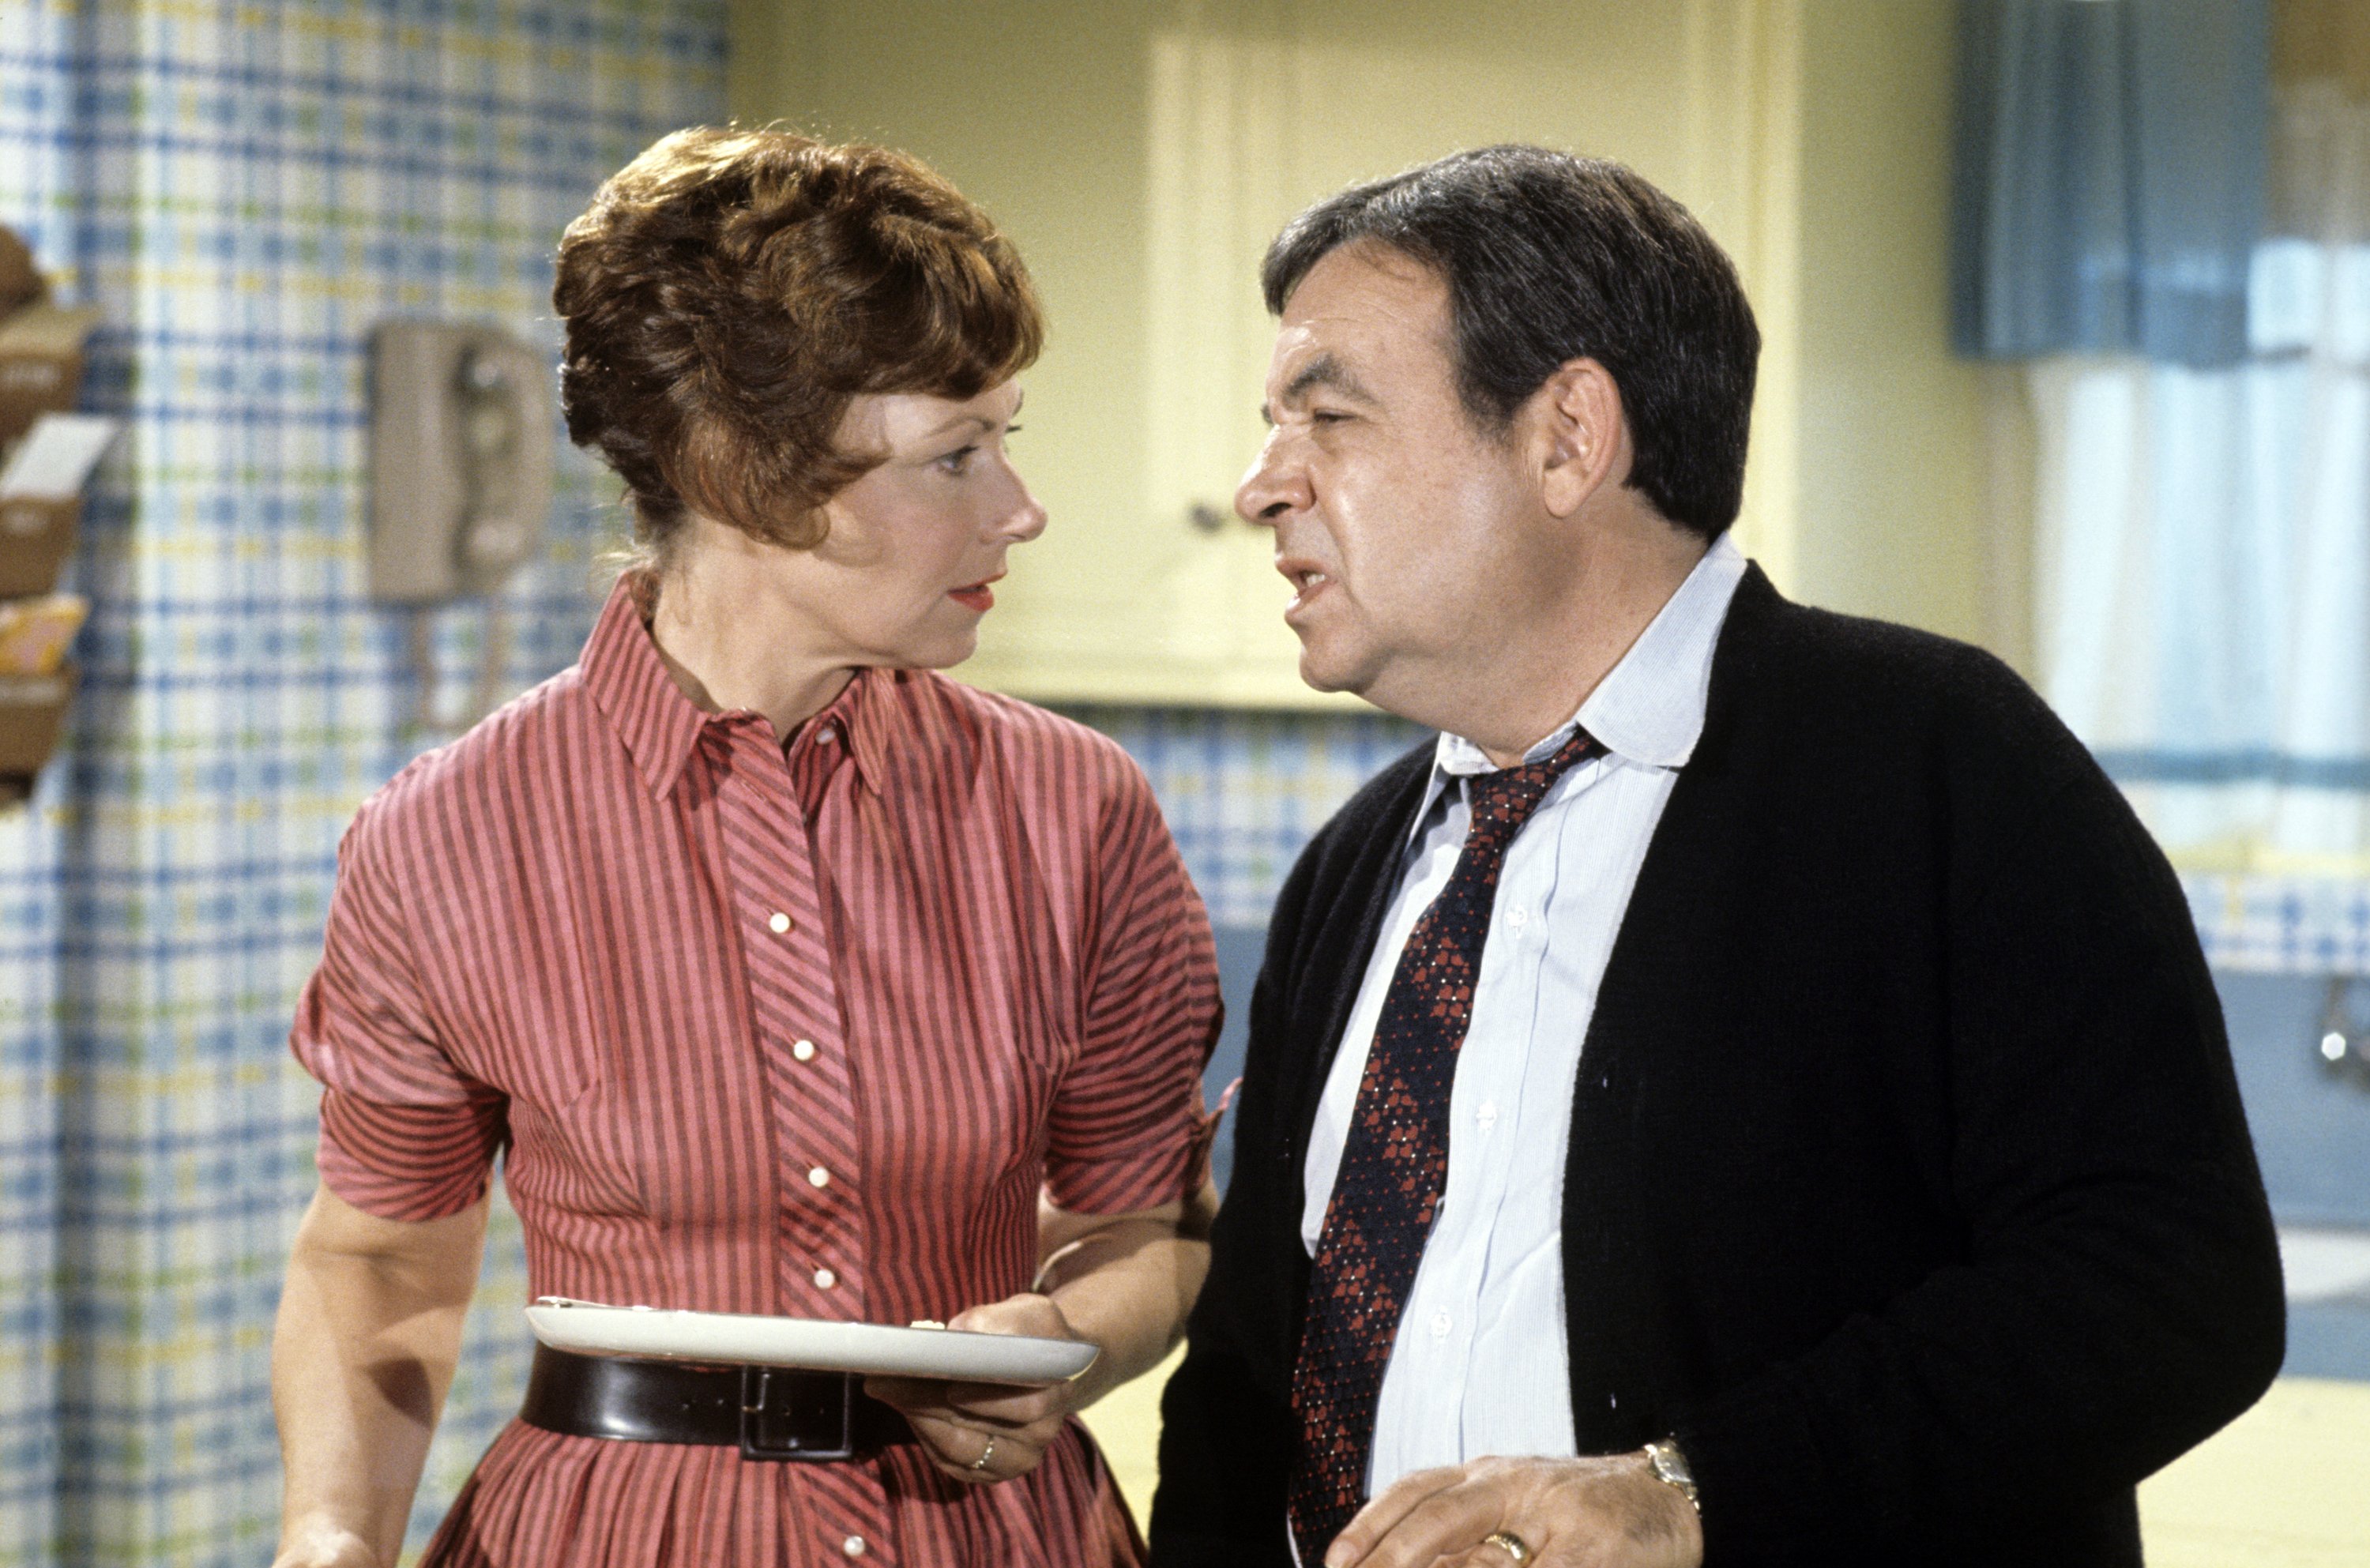 Marion Ross (Marion), Tom Bosley (Howard) on "Happy Days,"  January 15, 1974. | Photo: Getty Images